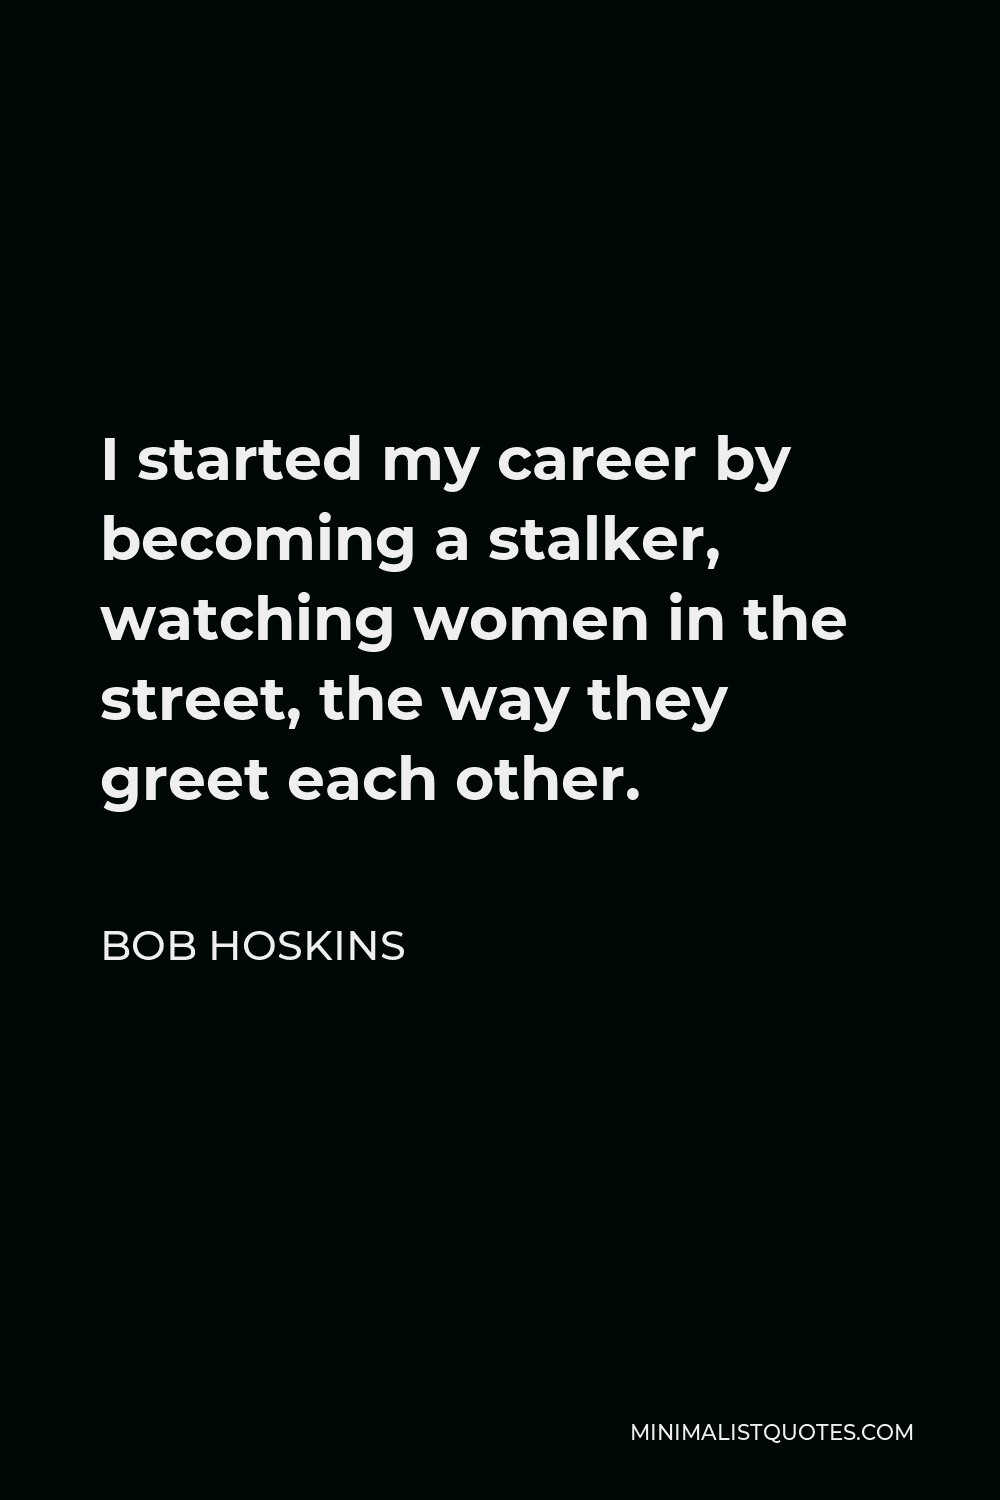 Bob Hoskins Quote - I started my career by becoming a stalker, watching women in the street, the way they greet each other.